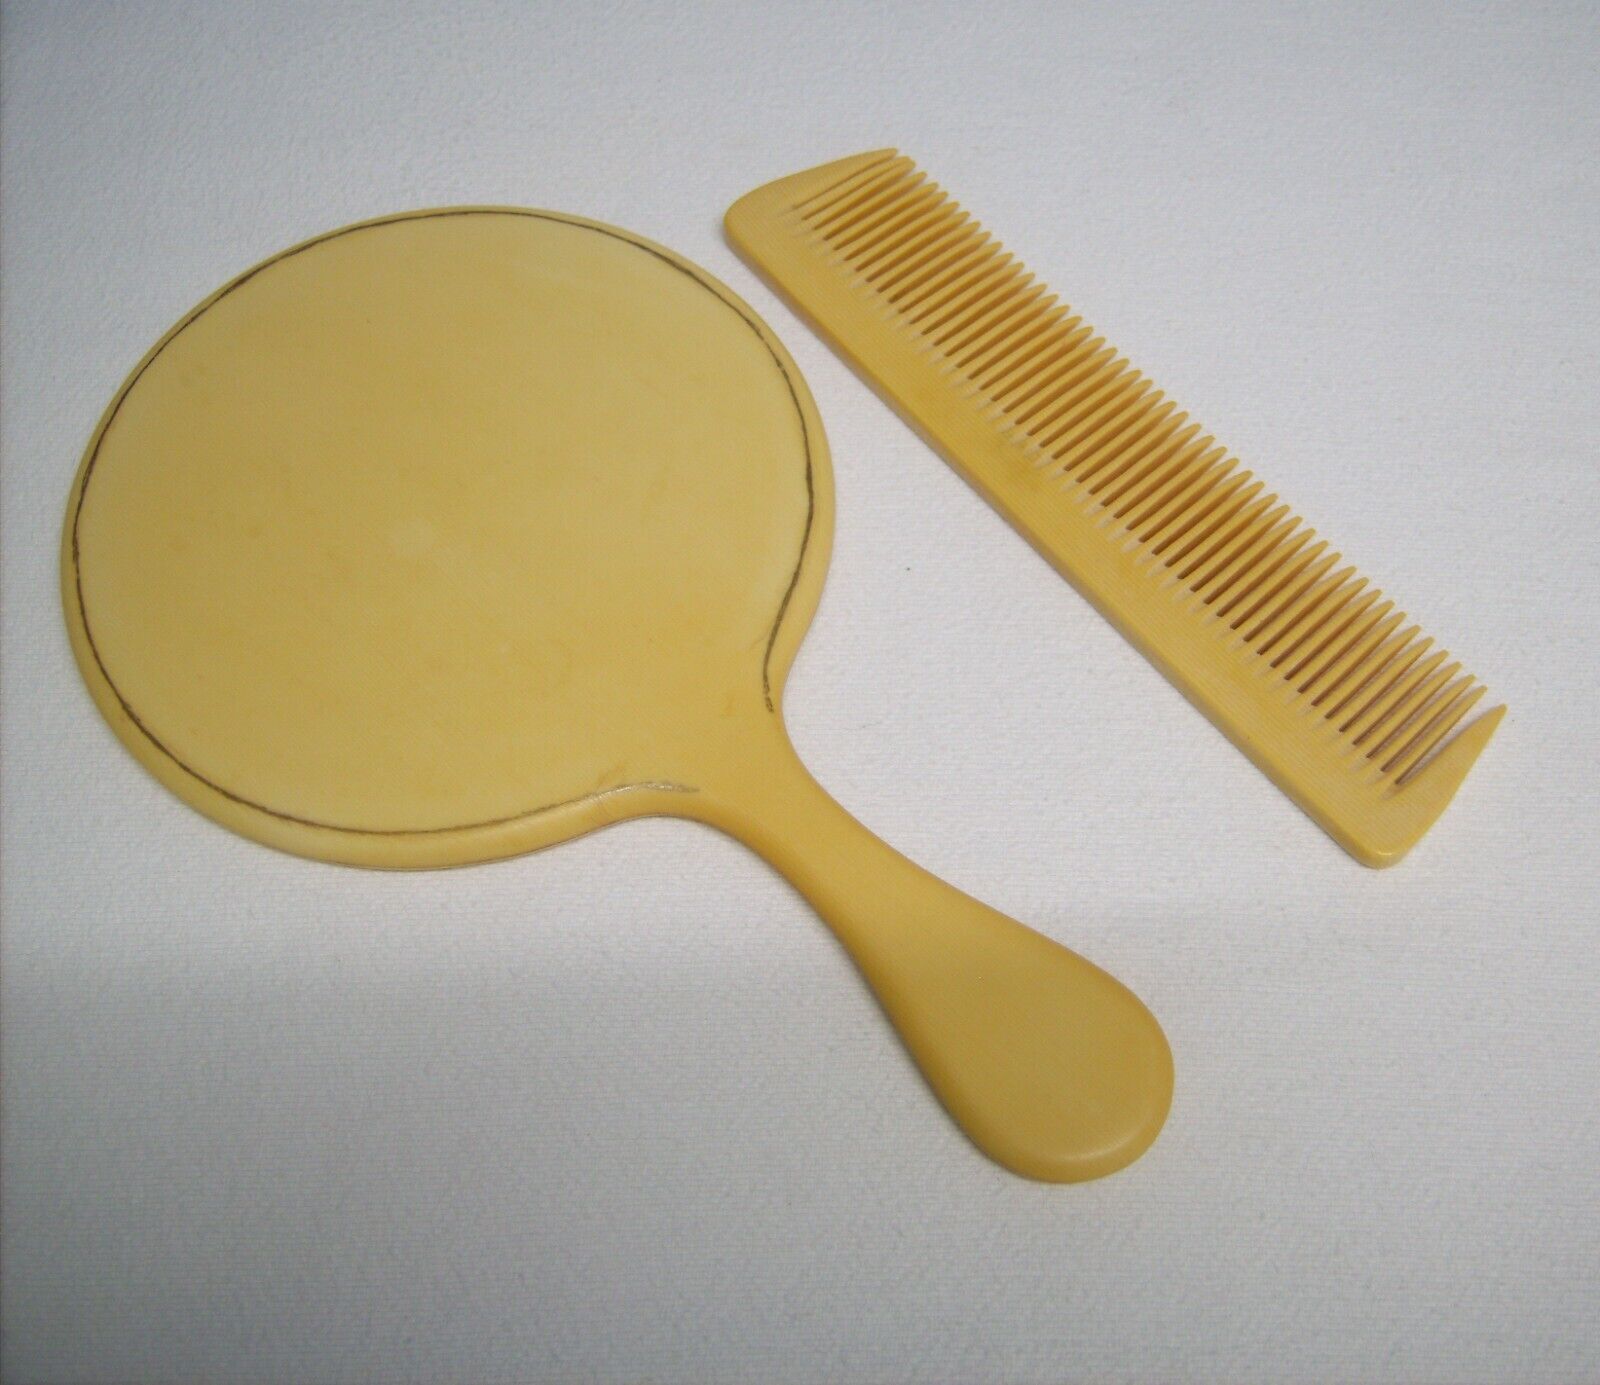 Antique Pyralin Hand Mirror, Comb Art Deco Yellow Celluloid Beveled Glass 1940